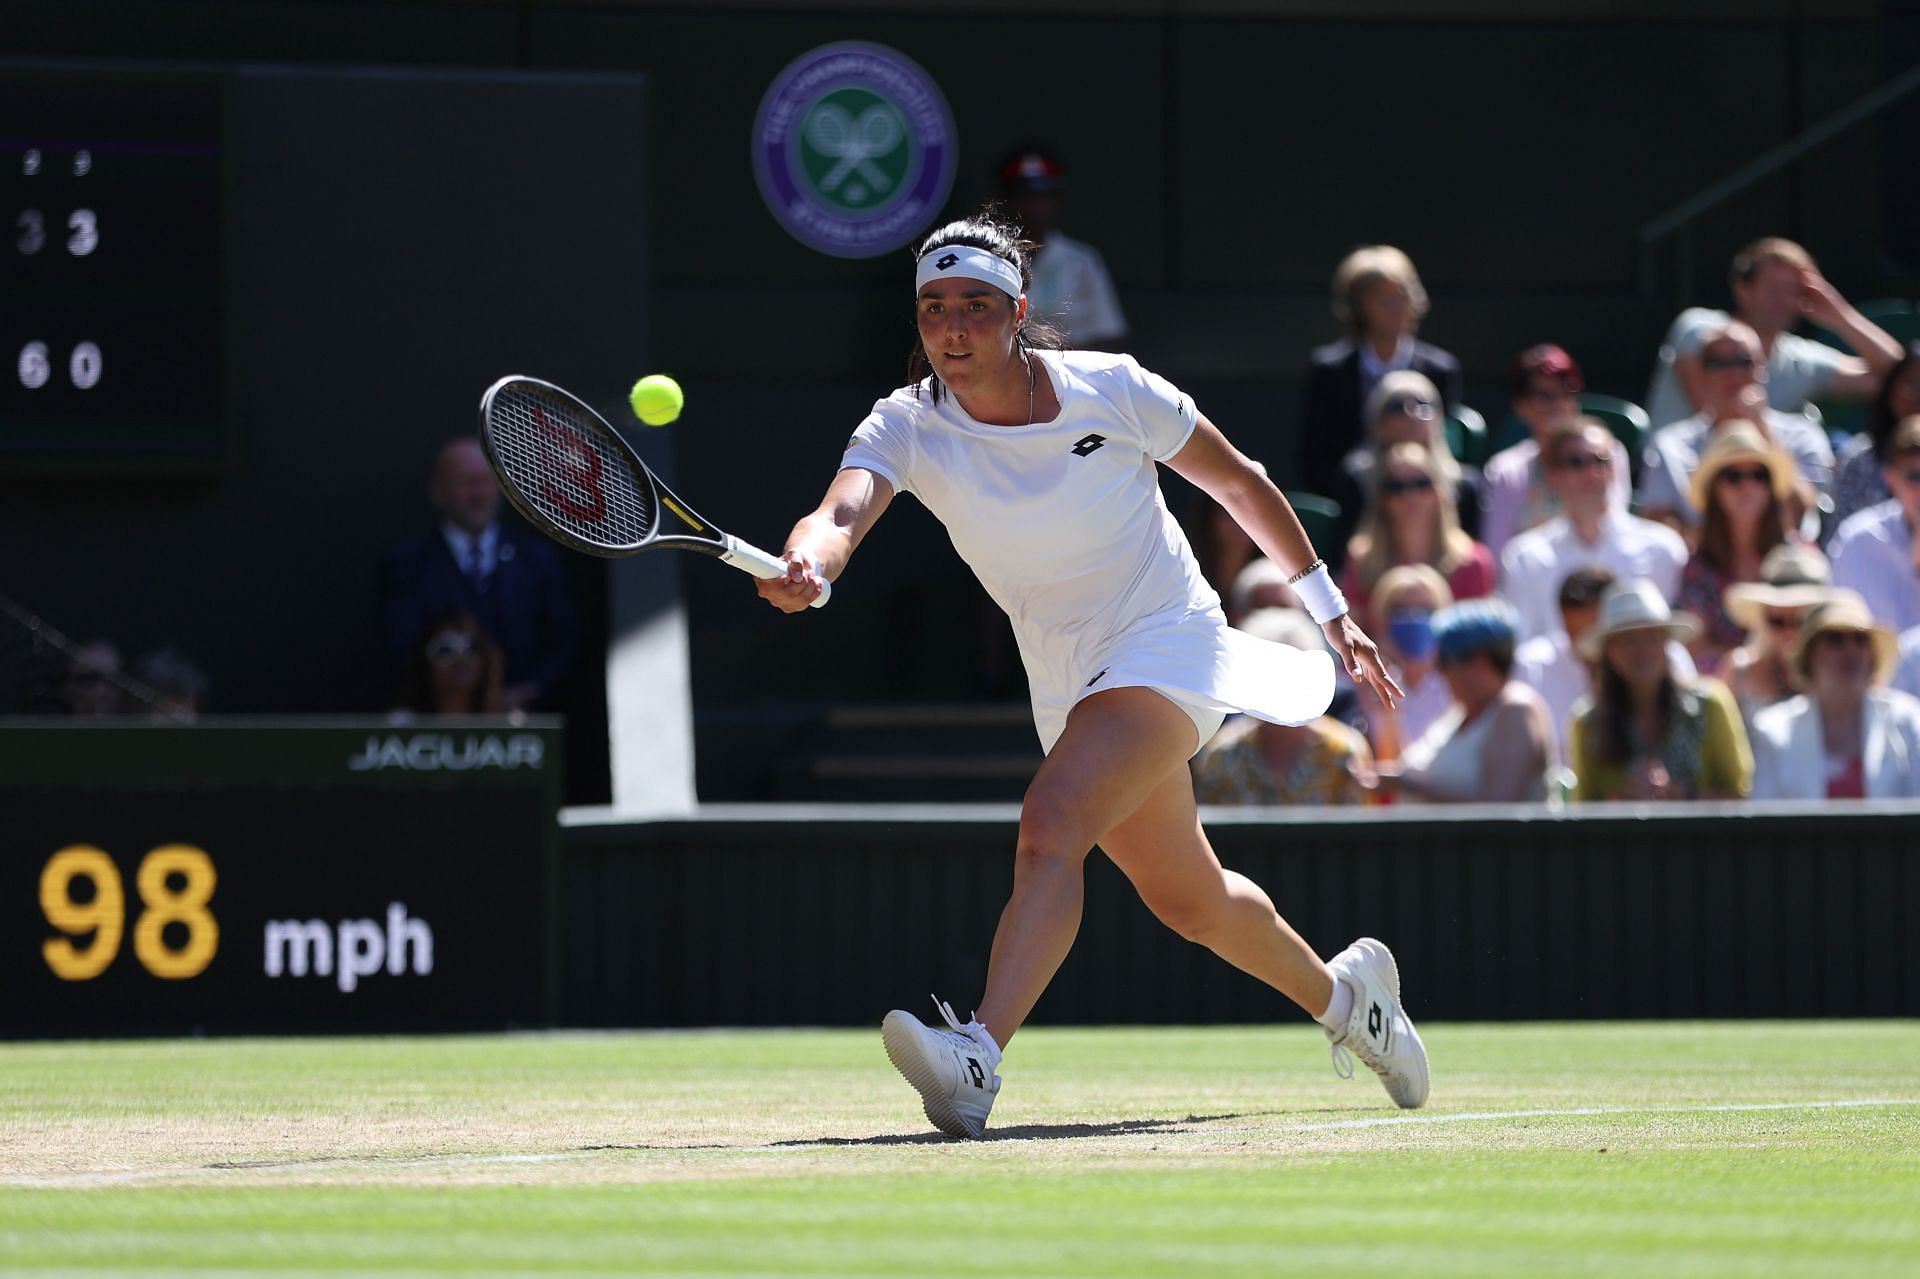 Ons Jabuer Day Eleven: The Championships - Wimbledon 2022